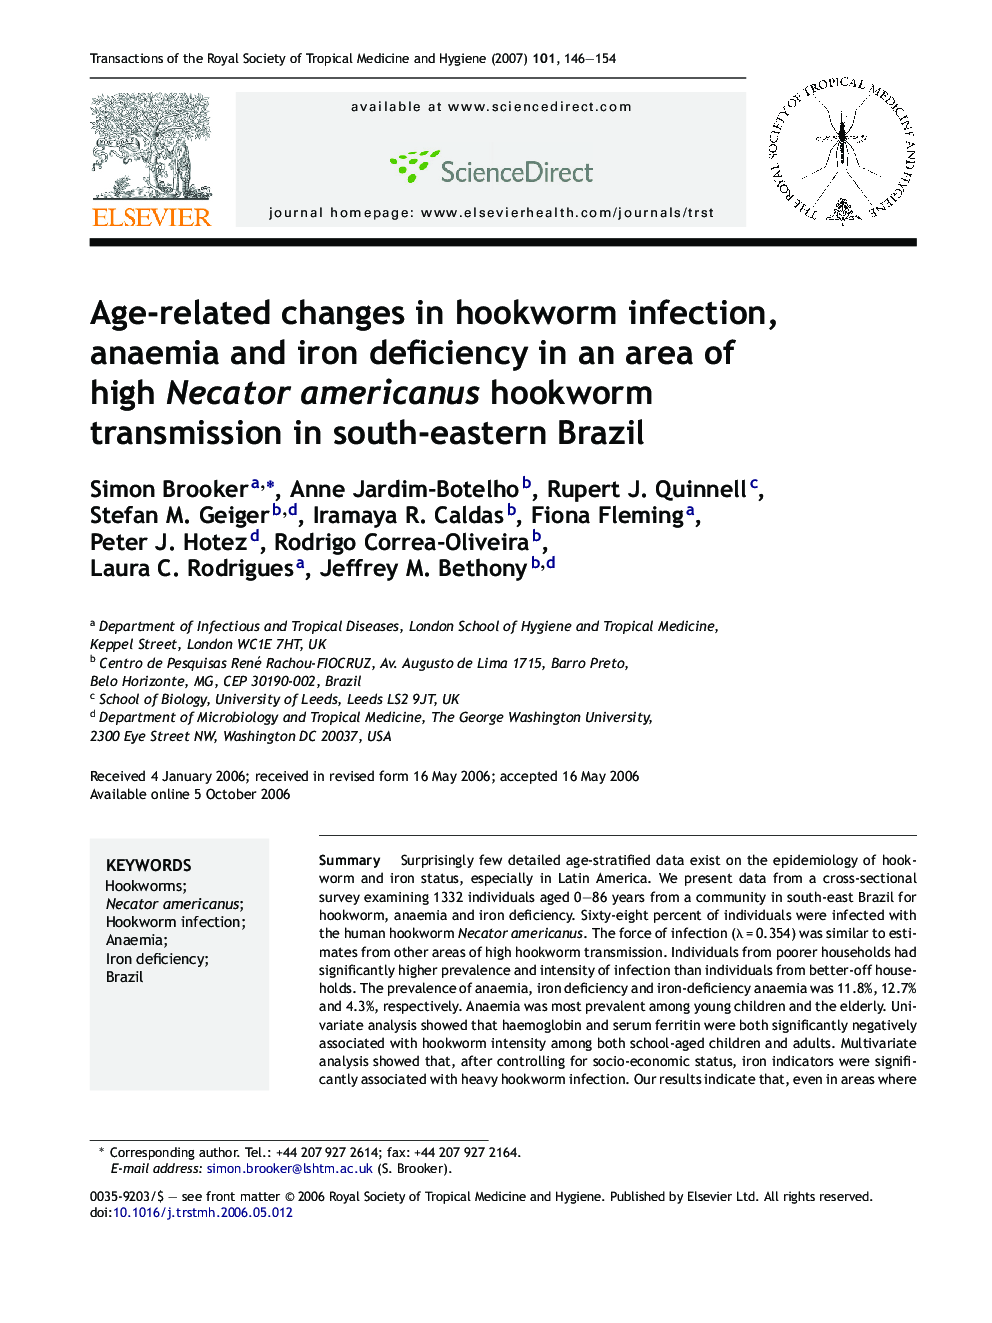 Age-related changes in hookworm infection, anaemia and iron deficiency in an area of high Necator americanus hookworm transmission in south-eastern Brazil